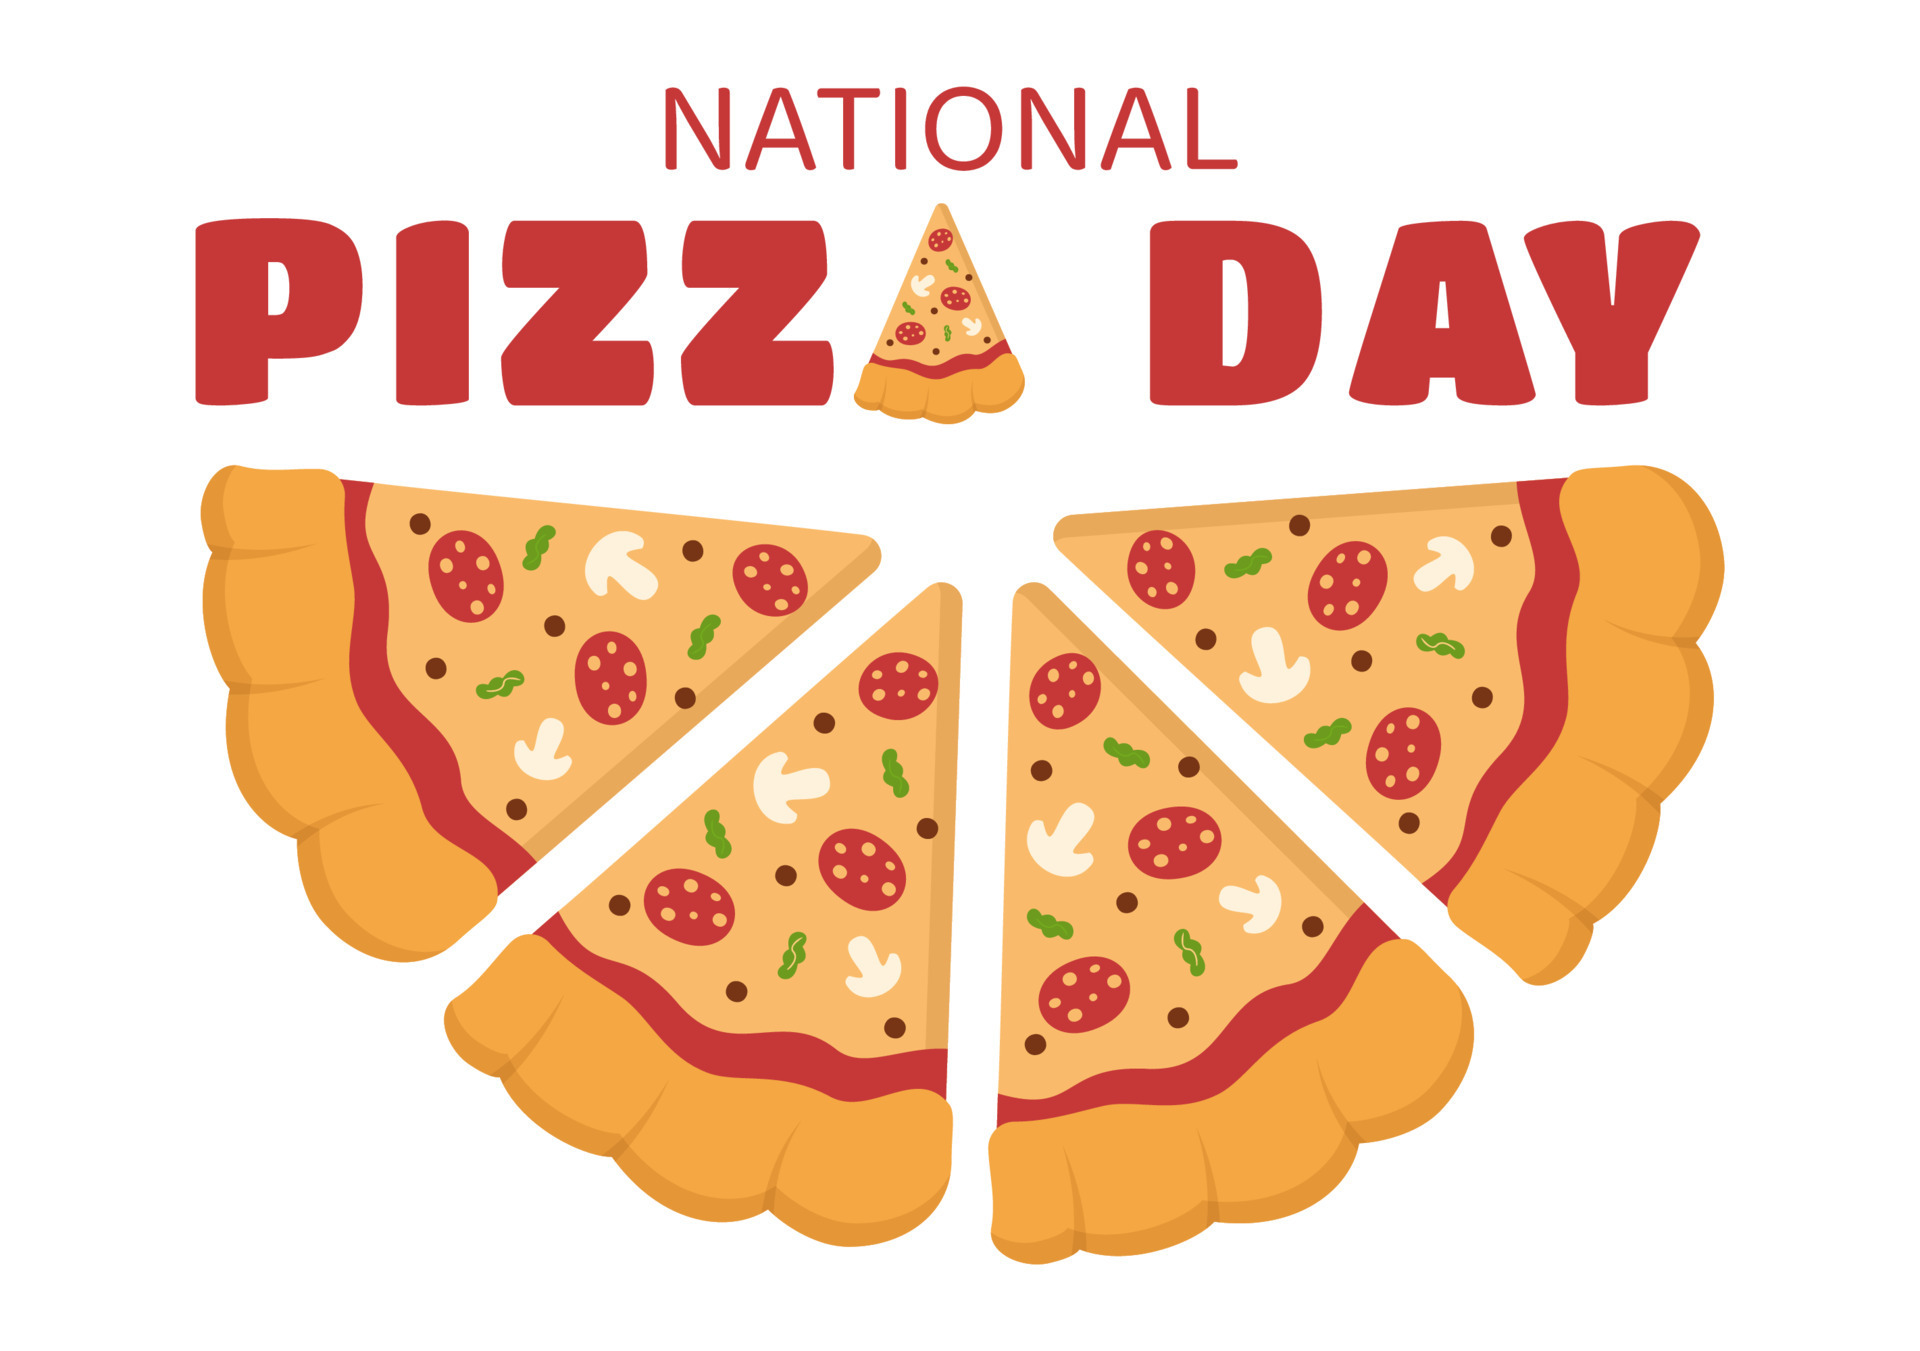 National Pizza Day on Celebration February 9 by Consuming Various Slice